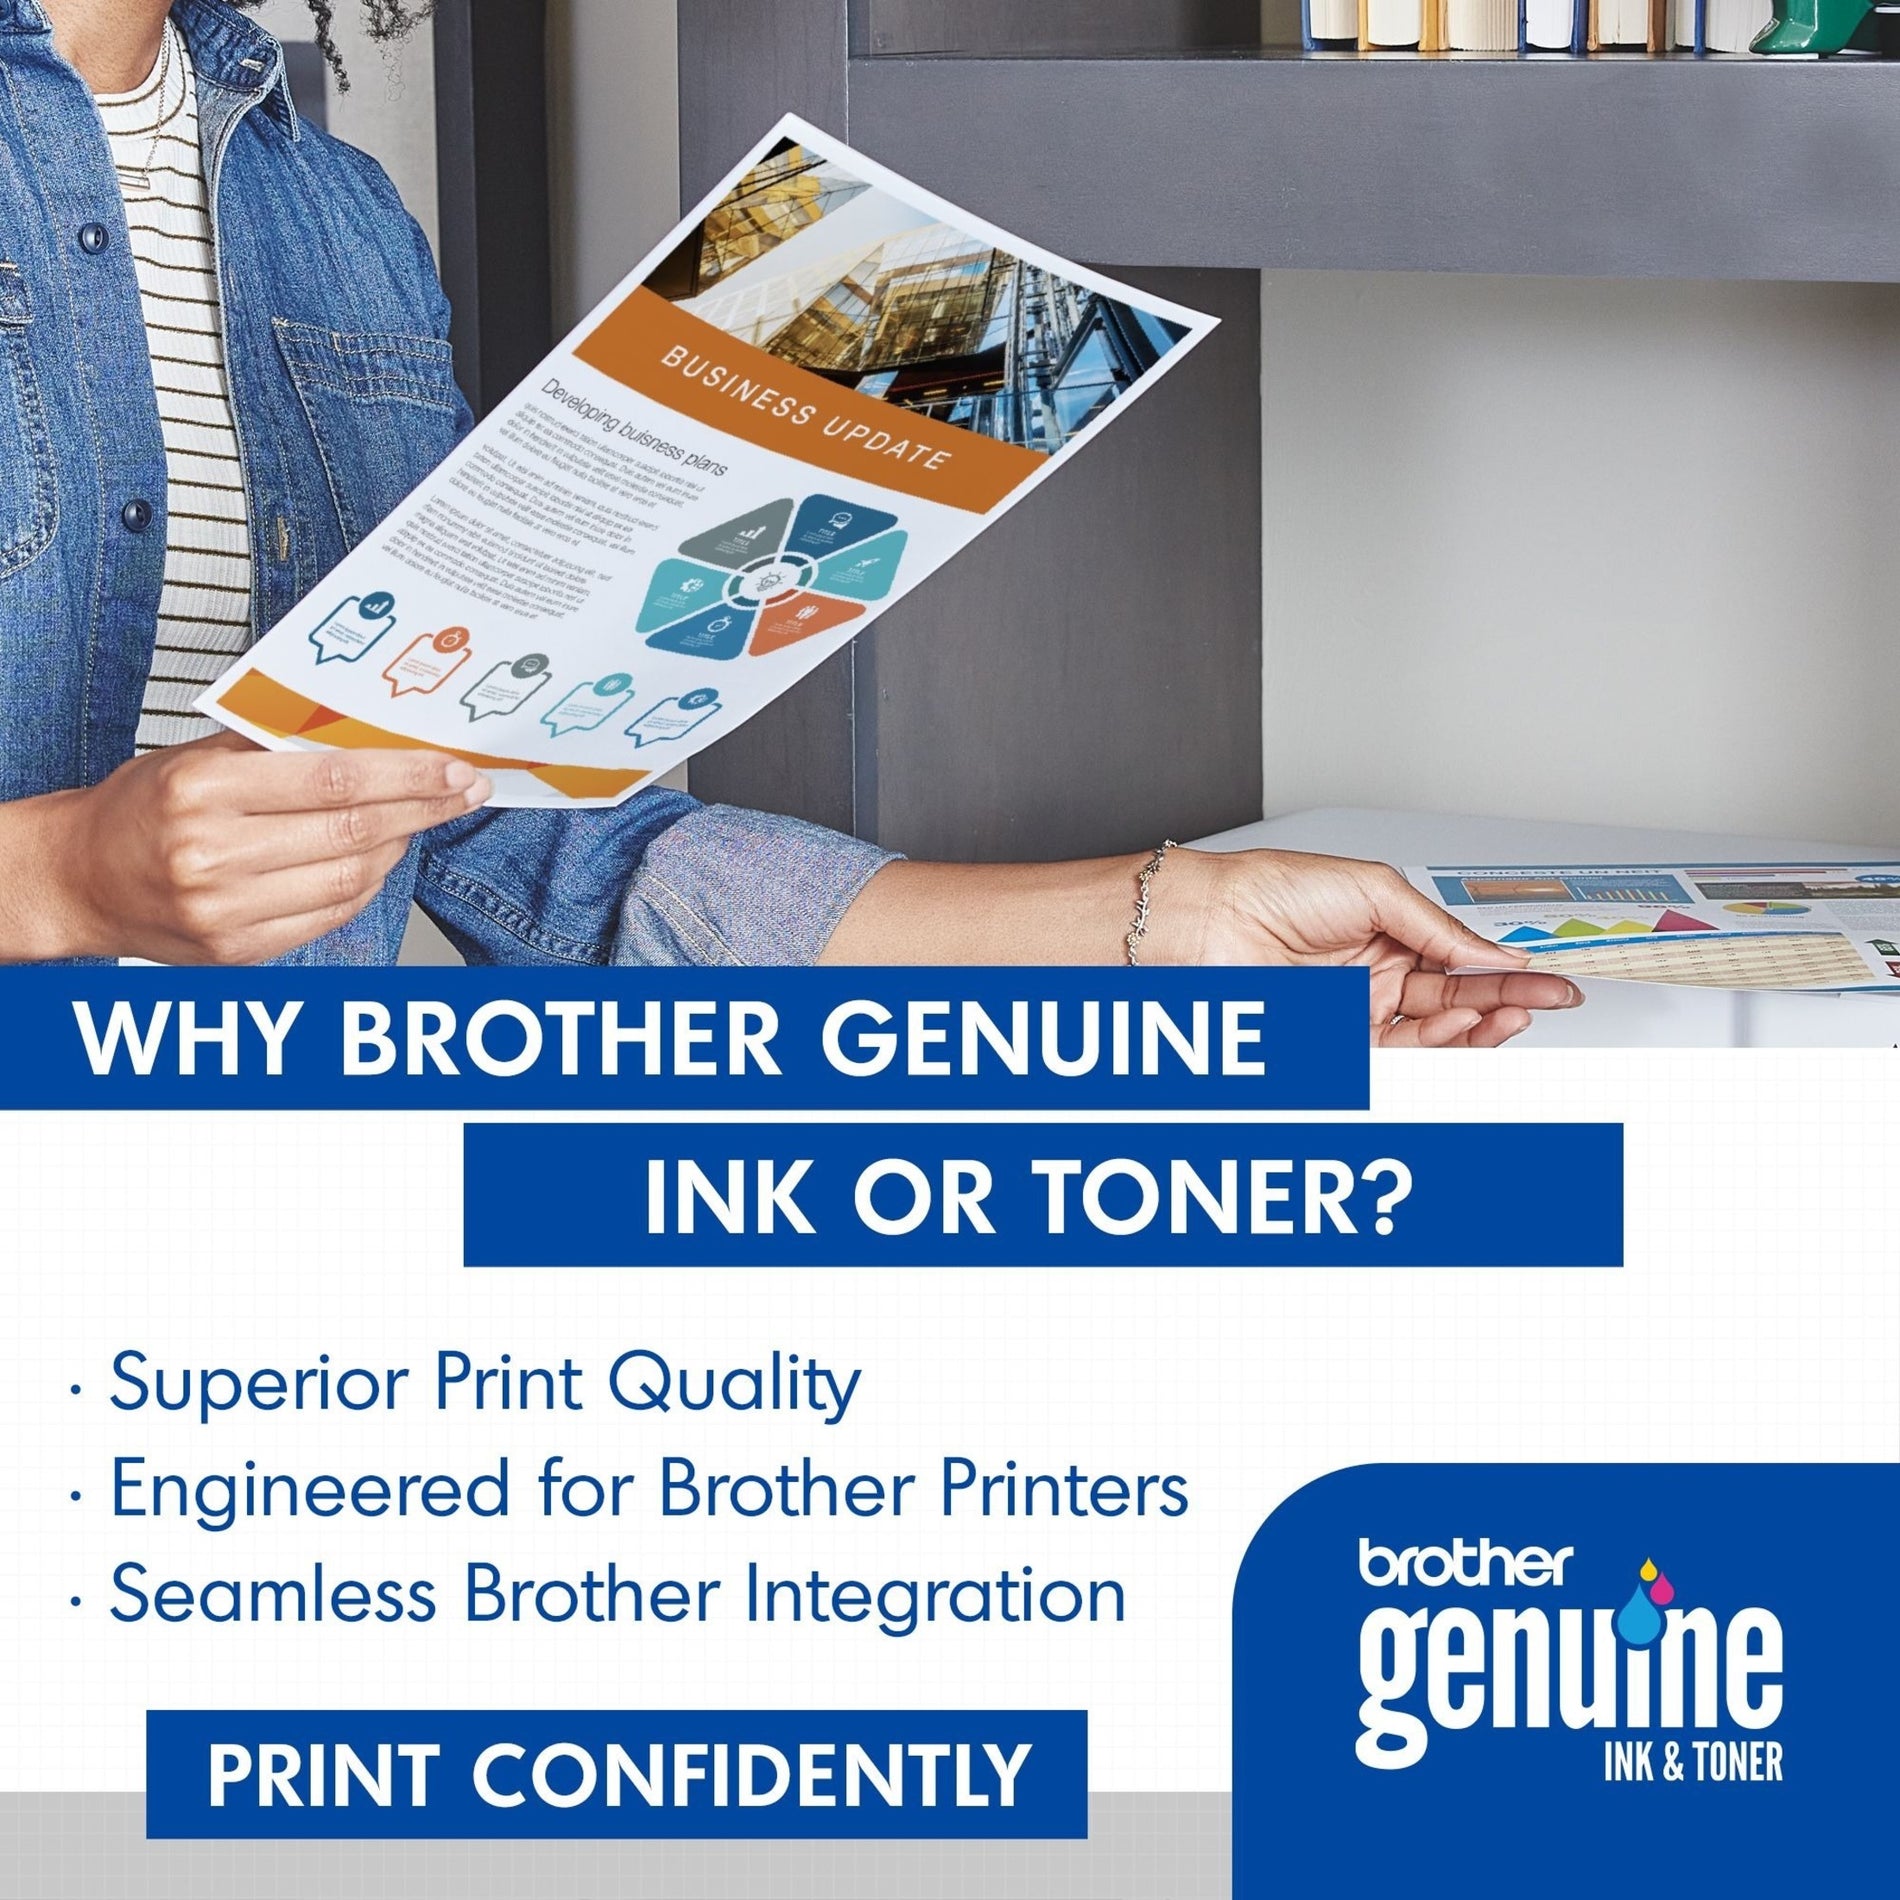 Brother TN336C High Yield Cyan Toner Cartridge, Genuine Brother Printer Toner, 3500 Pages Yield